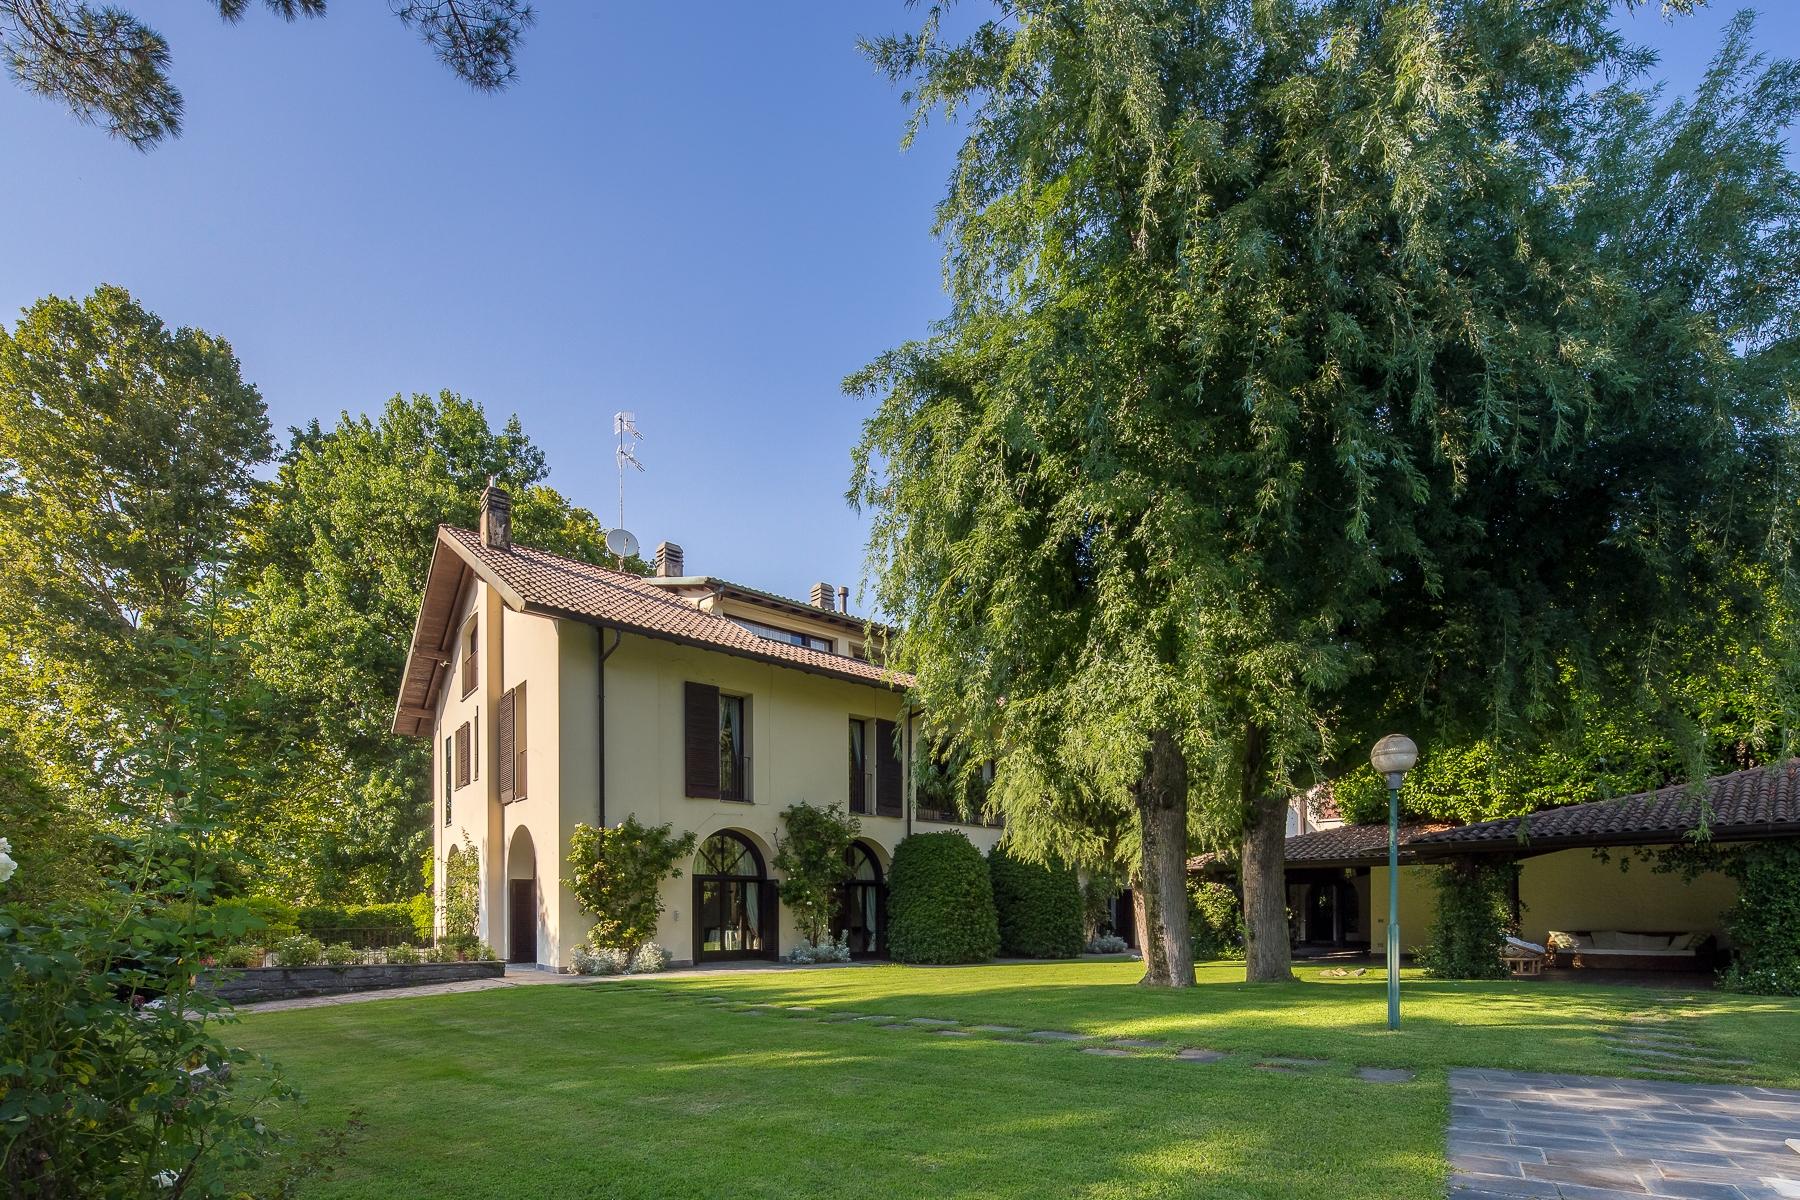 Villa with swimming pool on the Ticino river - 4